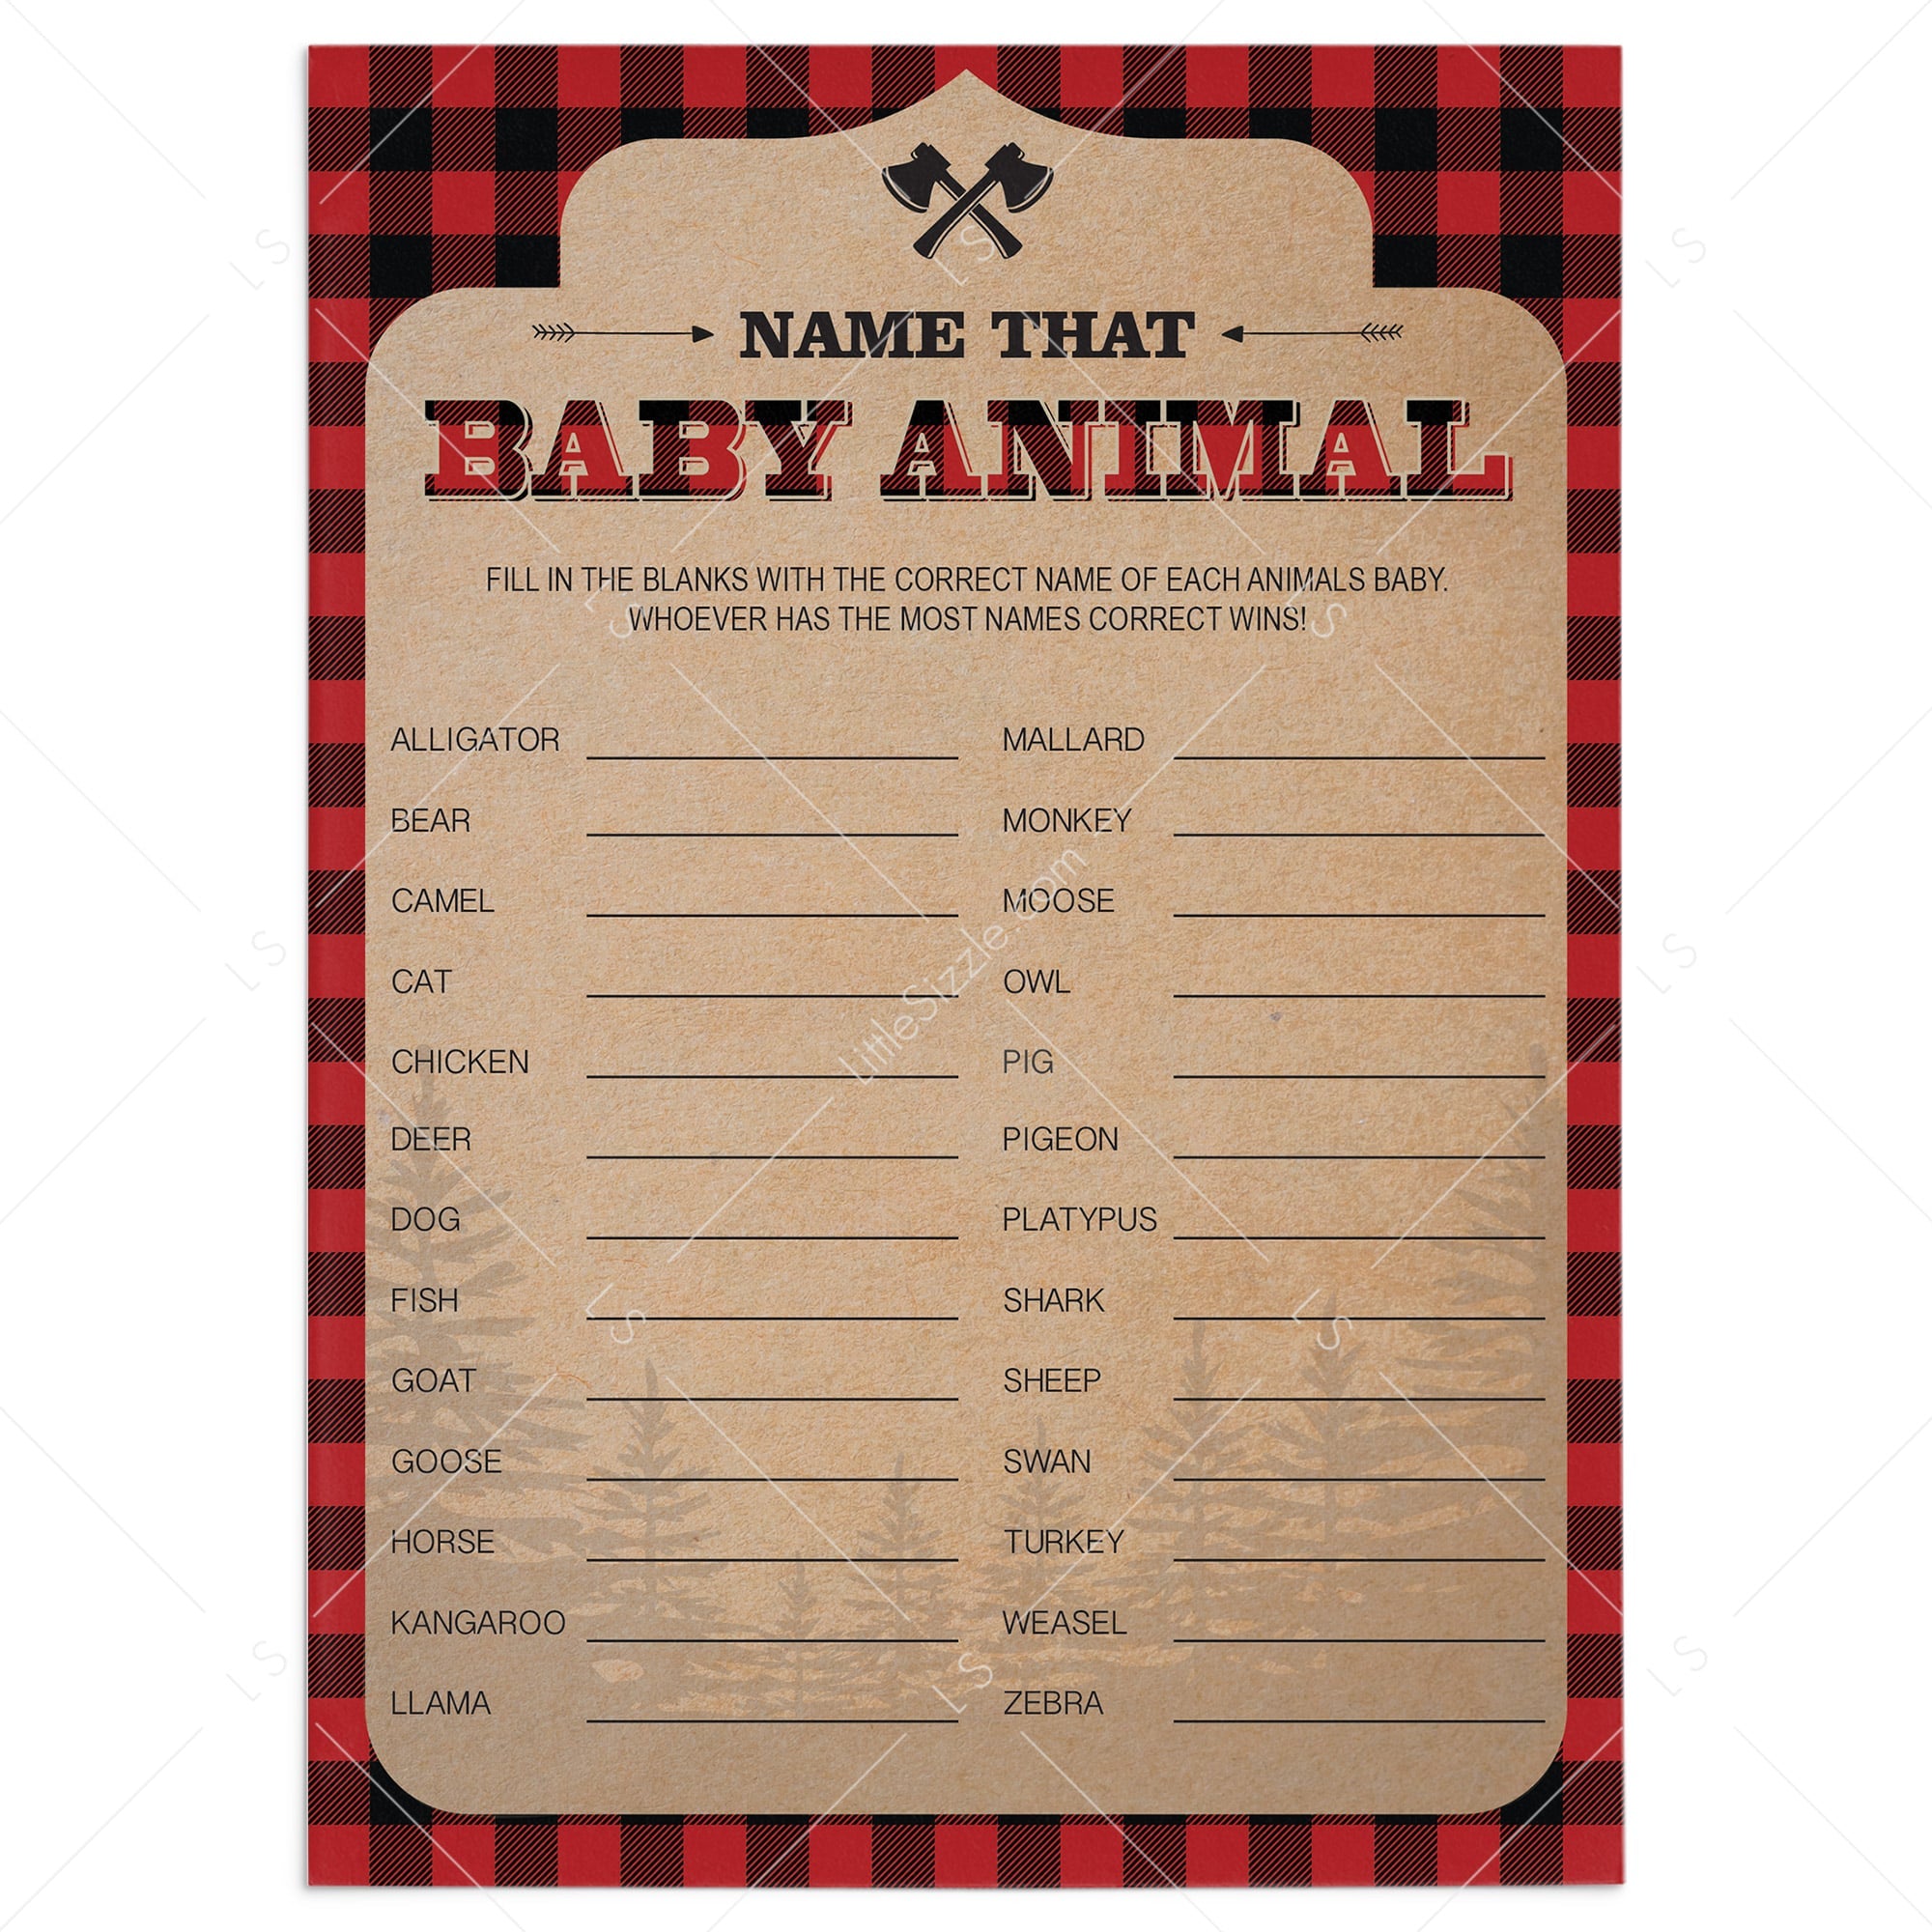 Name that baby animal game for rustic baby shower by LittleSizzle